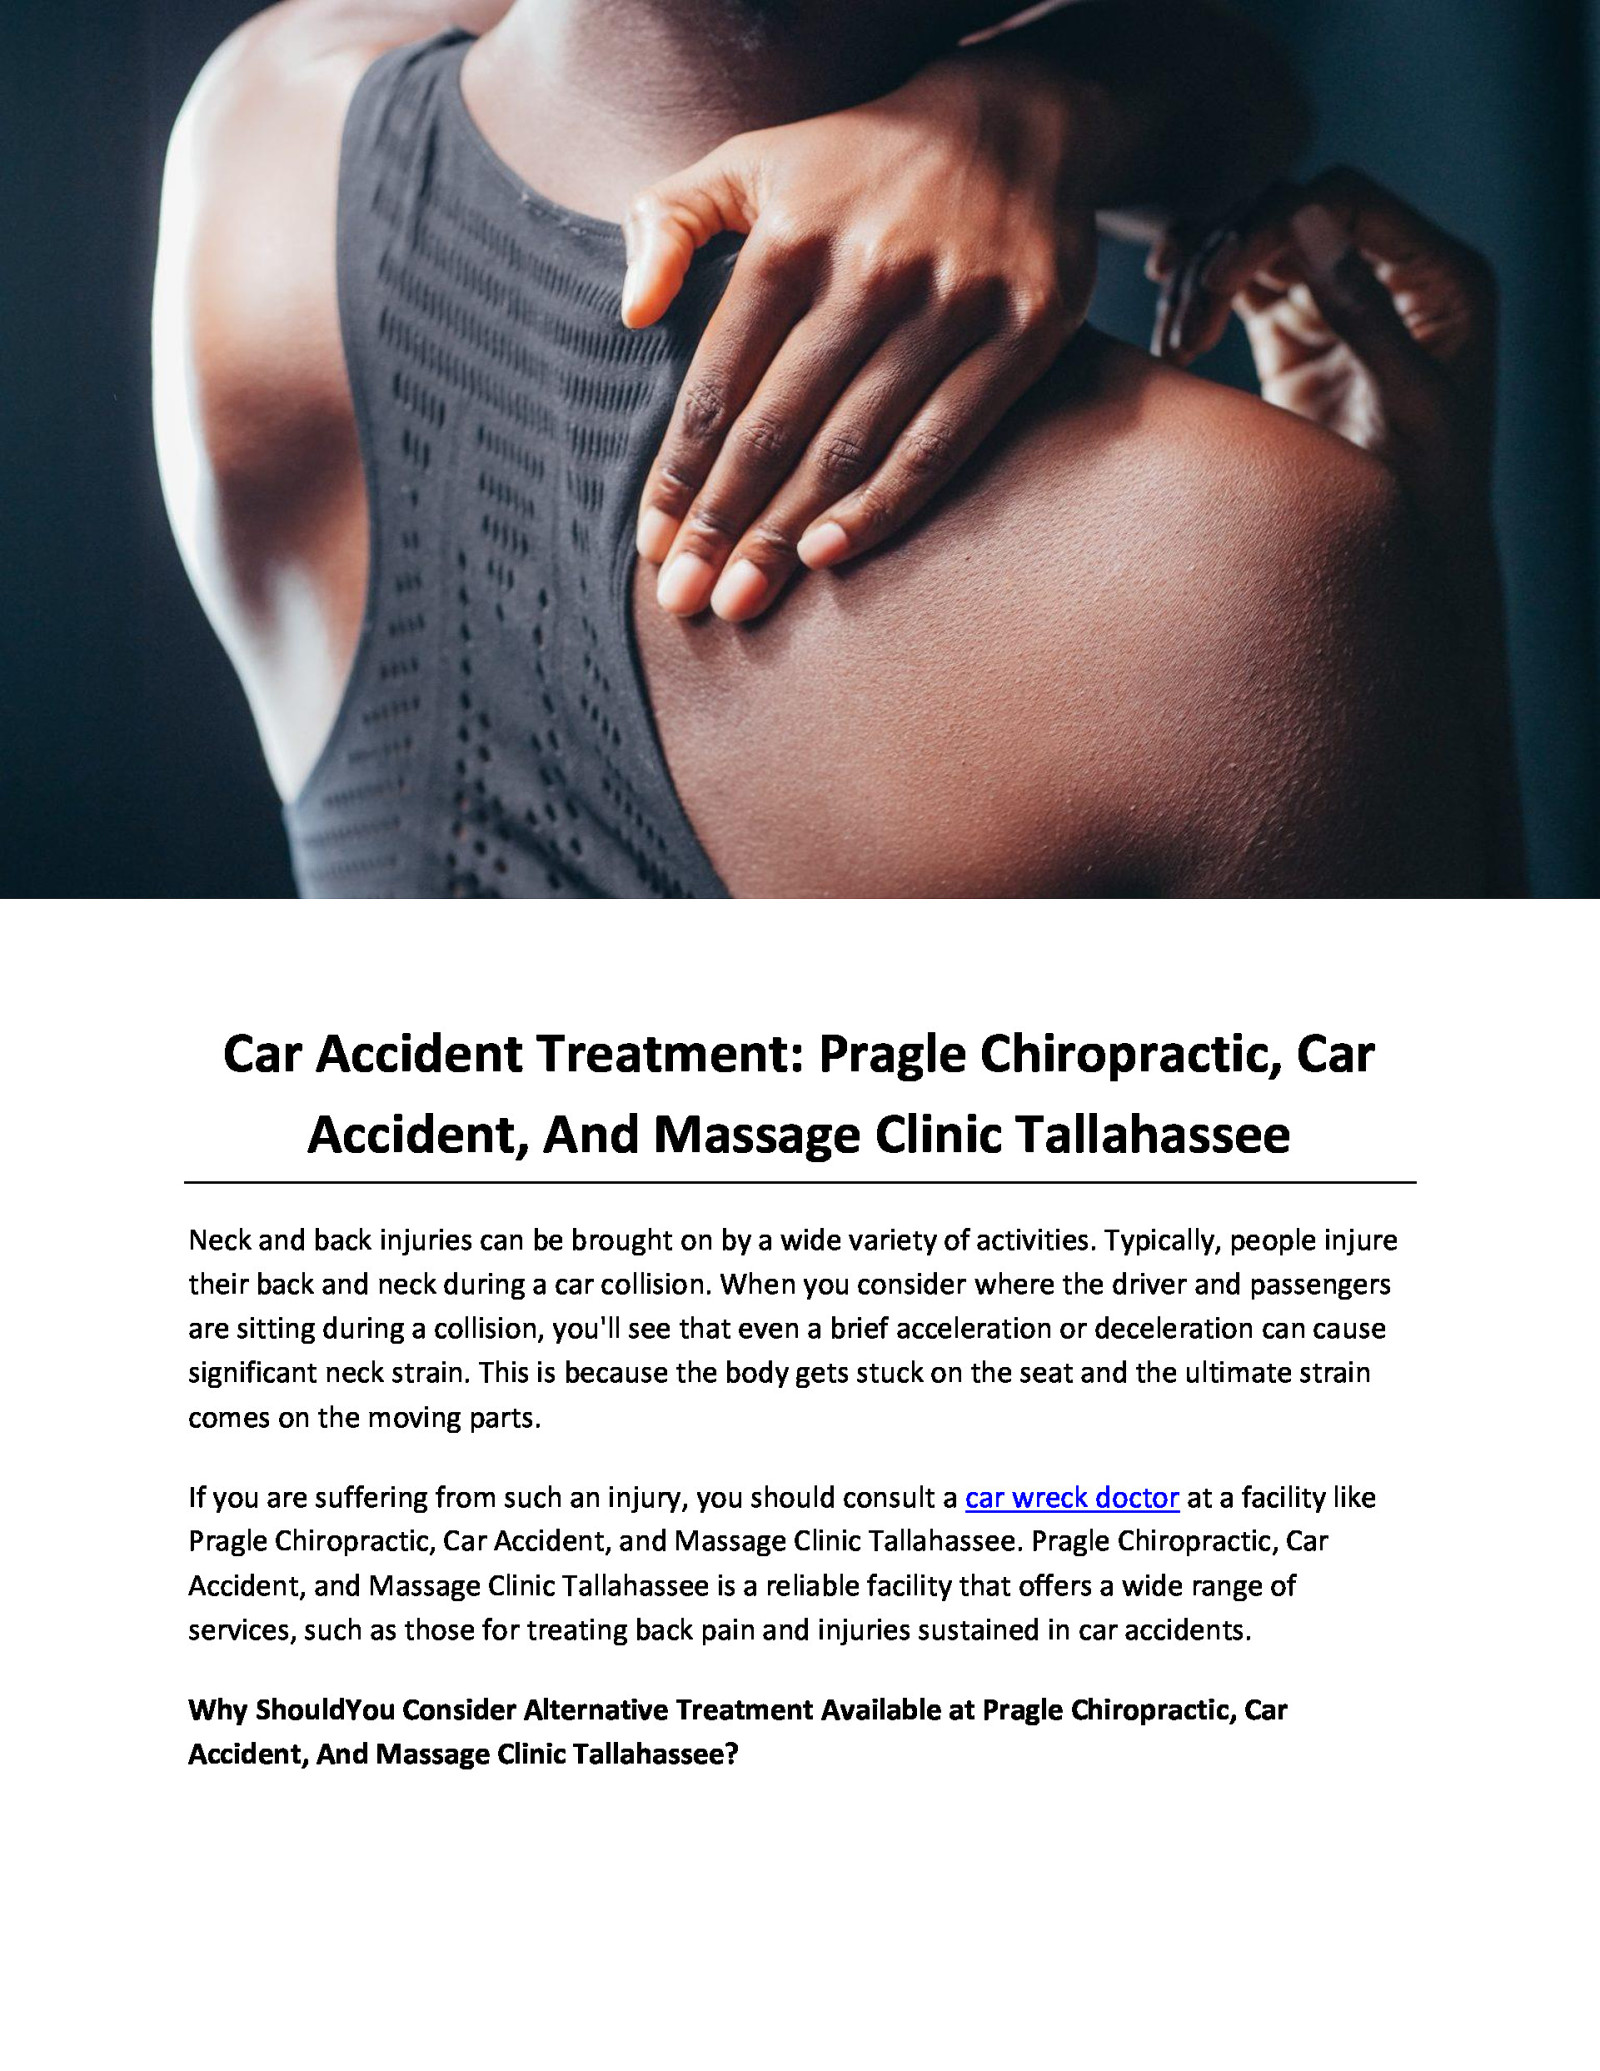 Car Accident Treatment: Pragle Chiropractic, Car Accident, And Massage Clinic Tallahassee